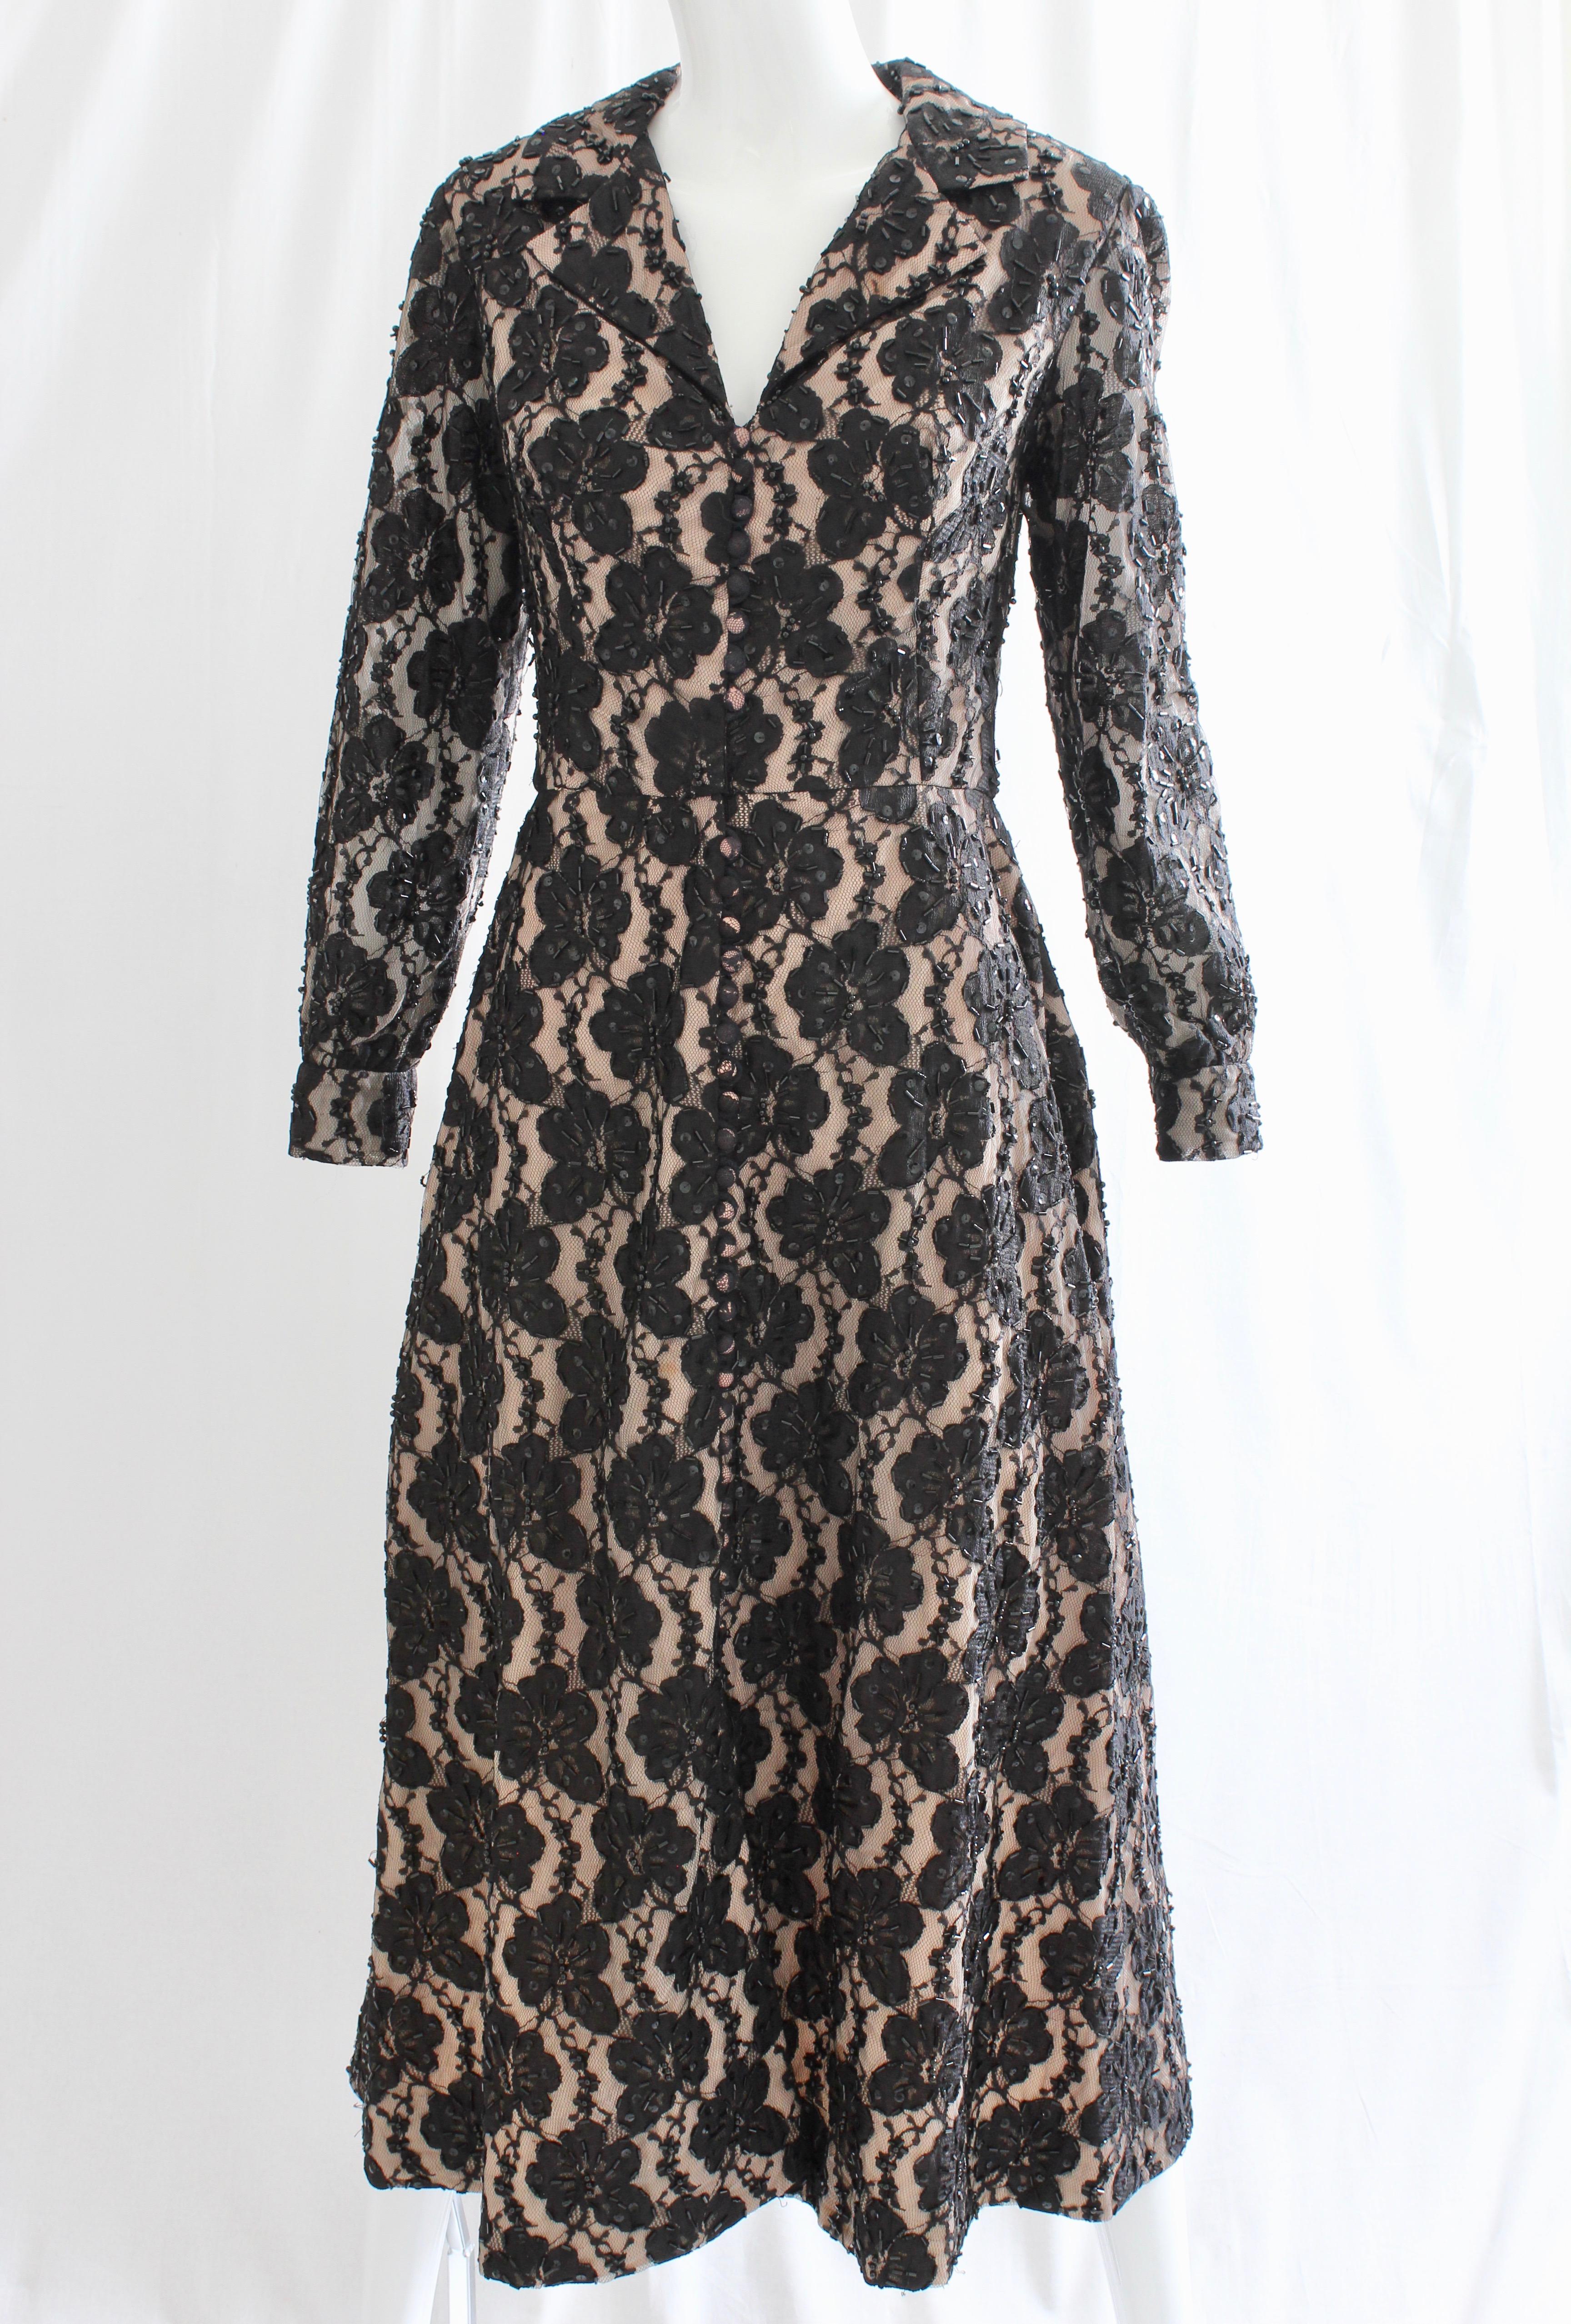 70s Vintage Black Beaded Illusion Lace Opera Coat Evening Wear Button Front M For Sale 1